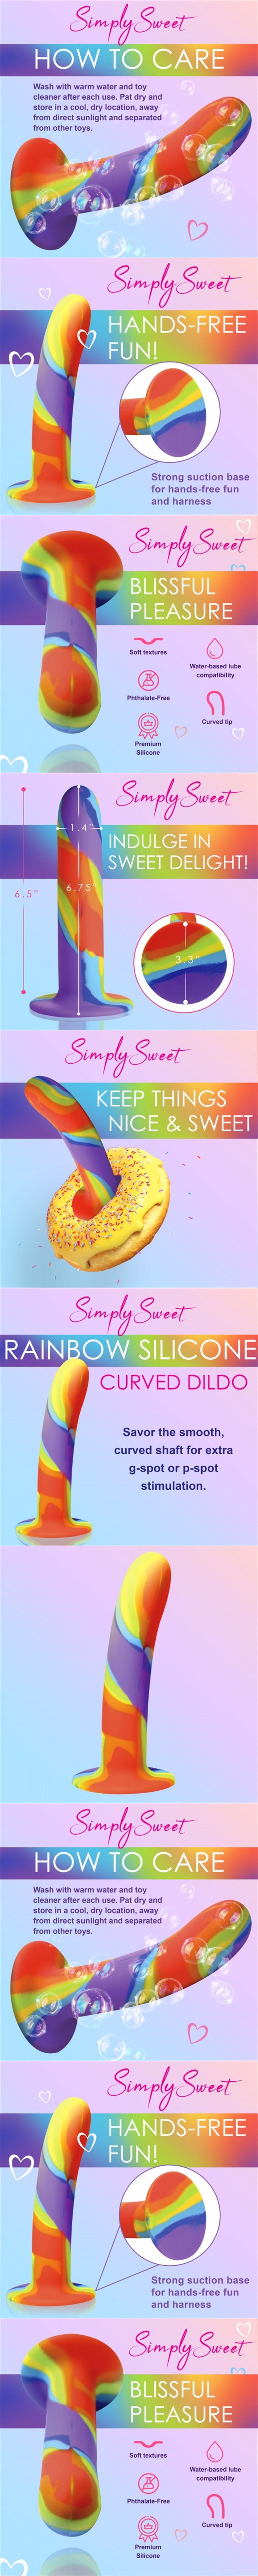 Simply Sweet Rainbow Silicone 6.75 Inch Dildo With Suction Cup